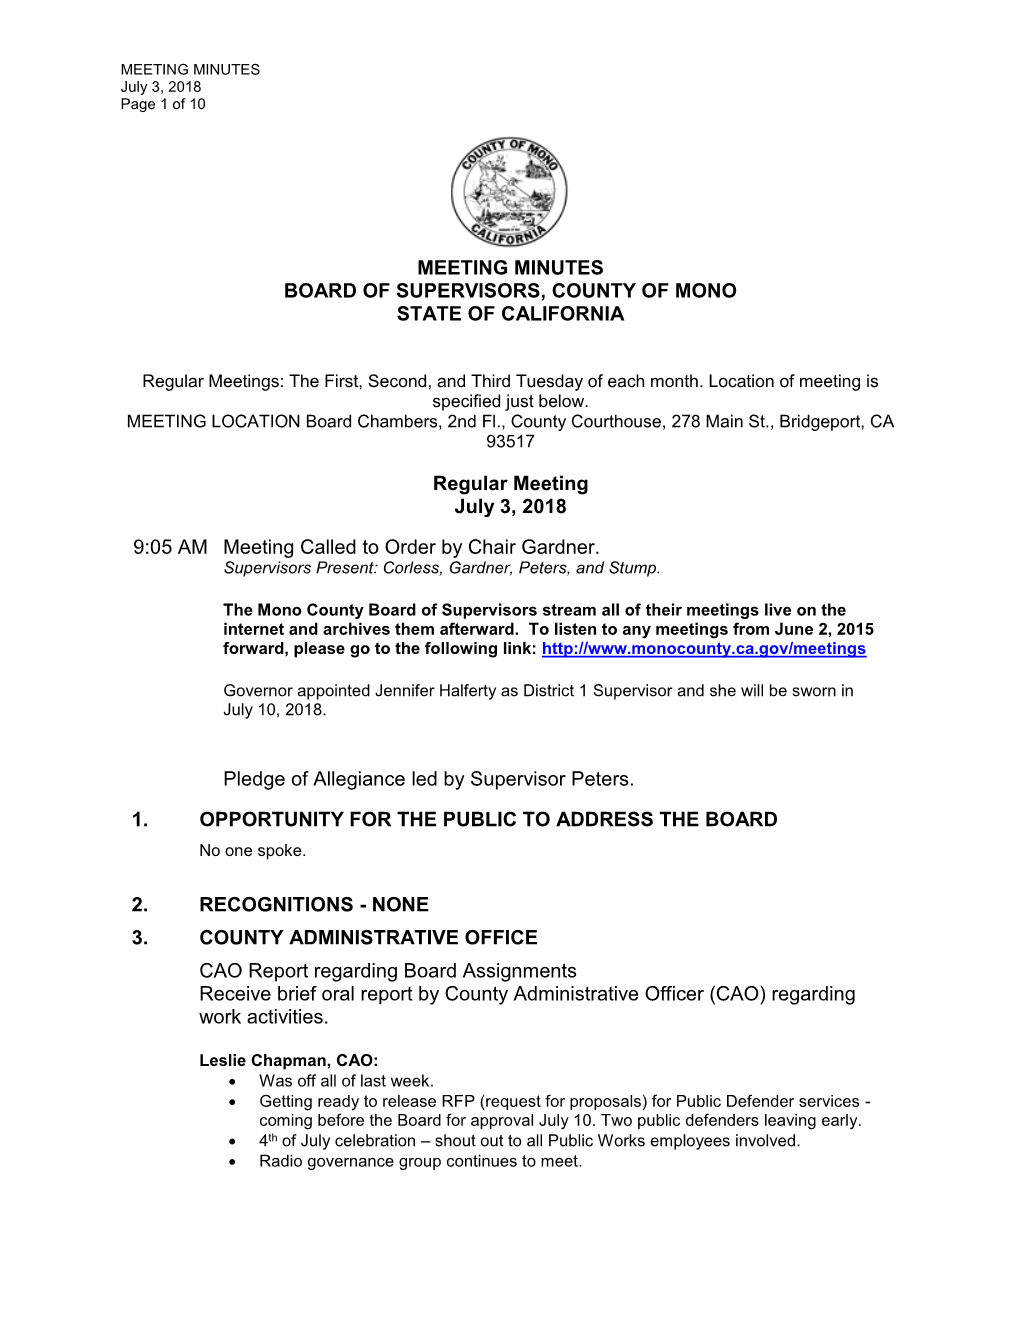 Meeting Minutes Board of Supervisors, County of Mono State of California